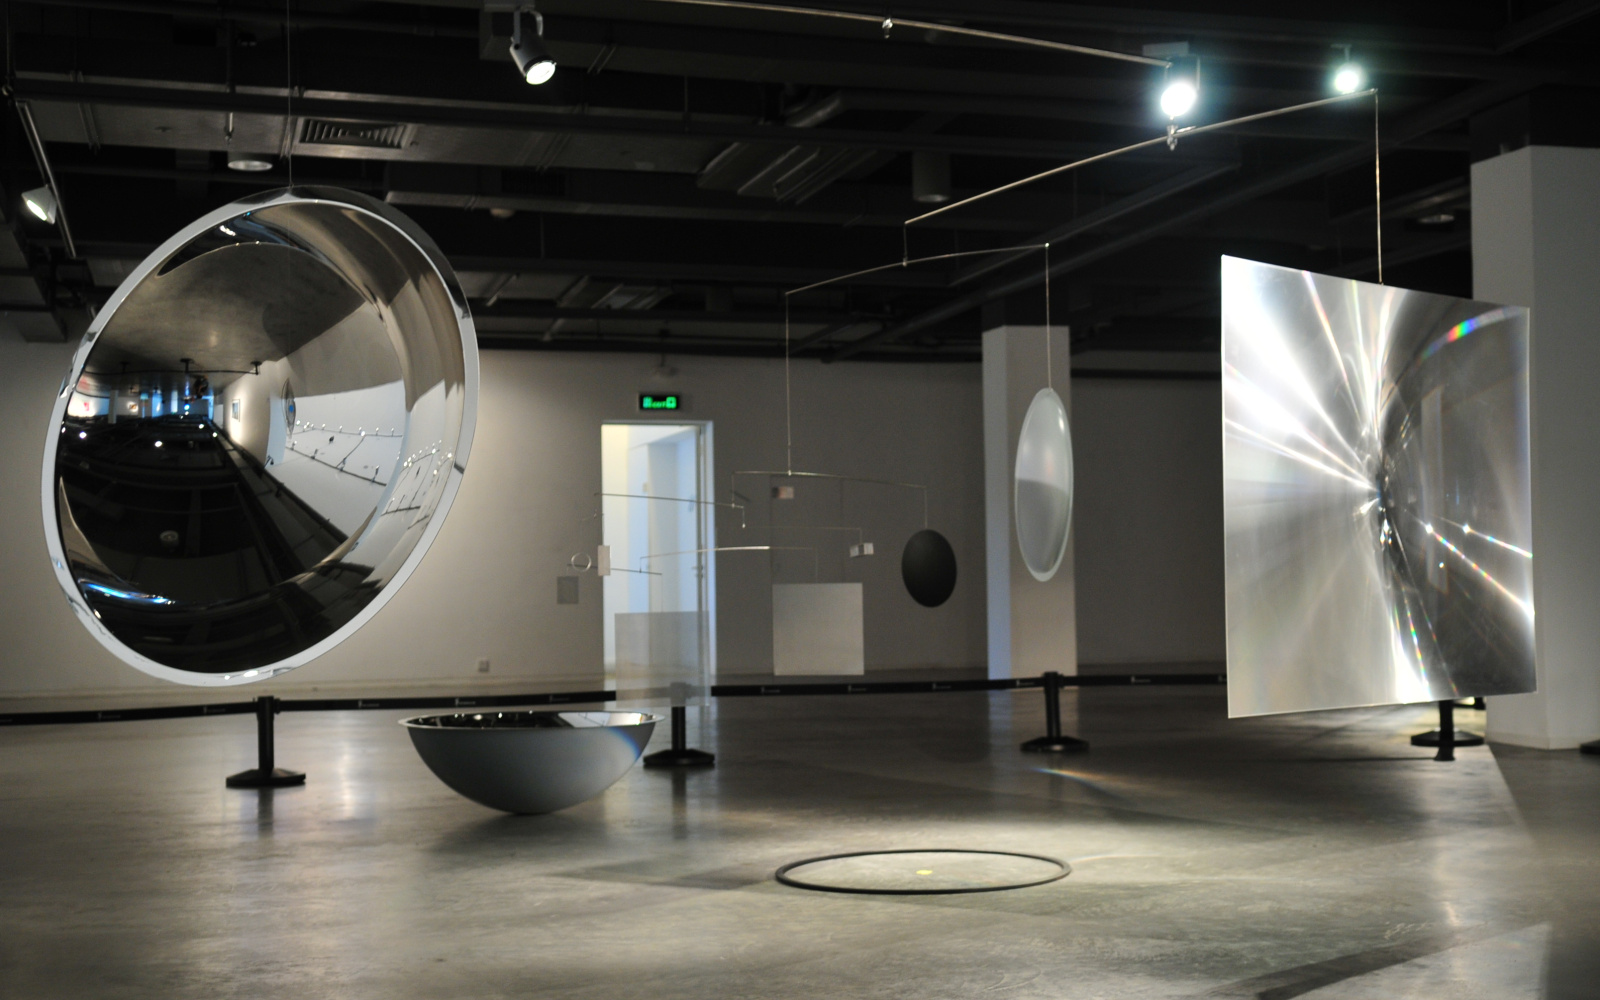 View of the installation Transoptics IV by Dieter Jung in the OCT Art & Design Gallery